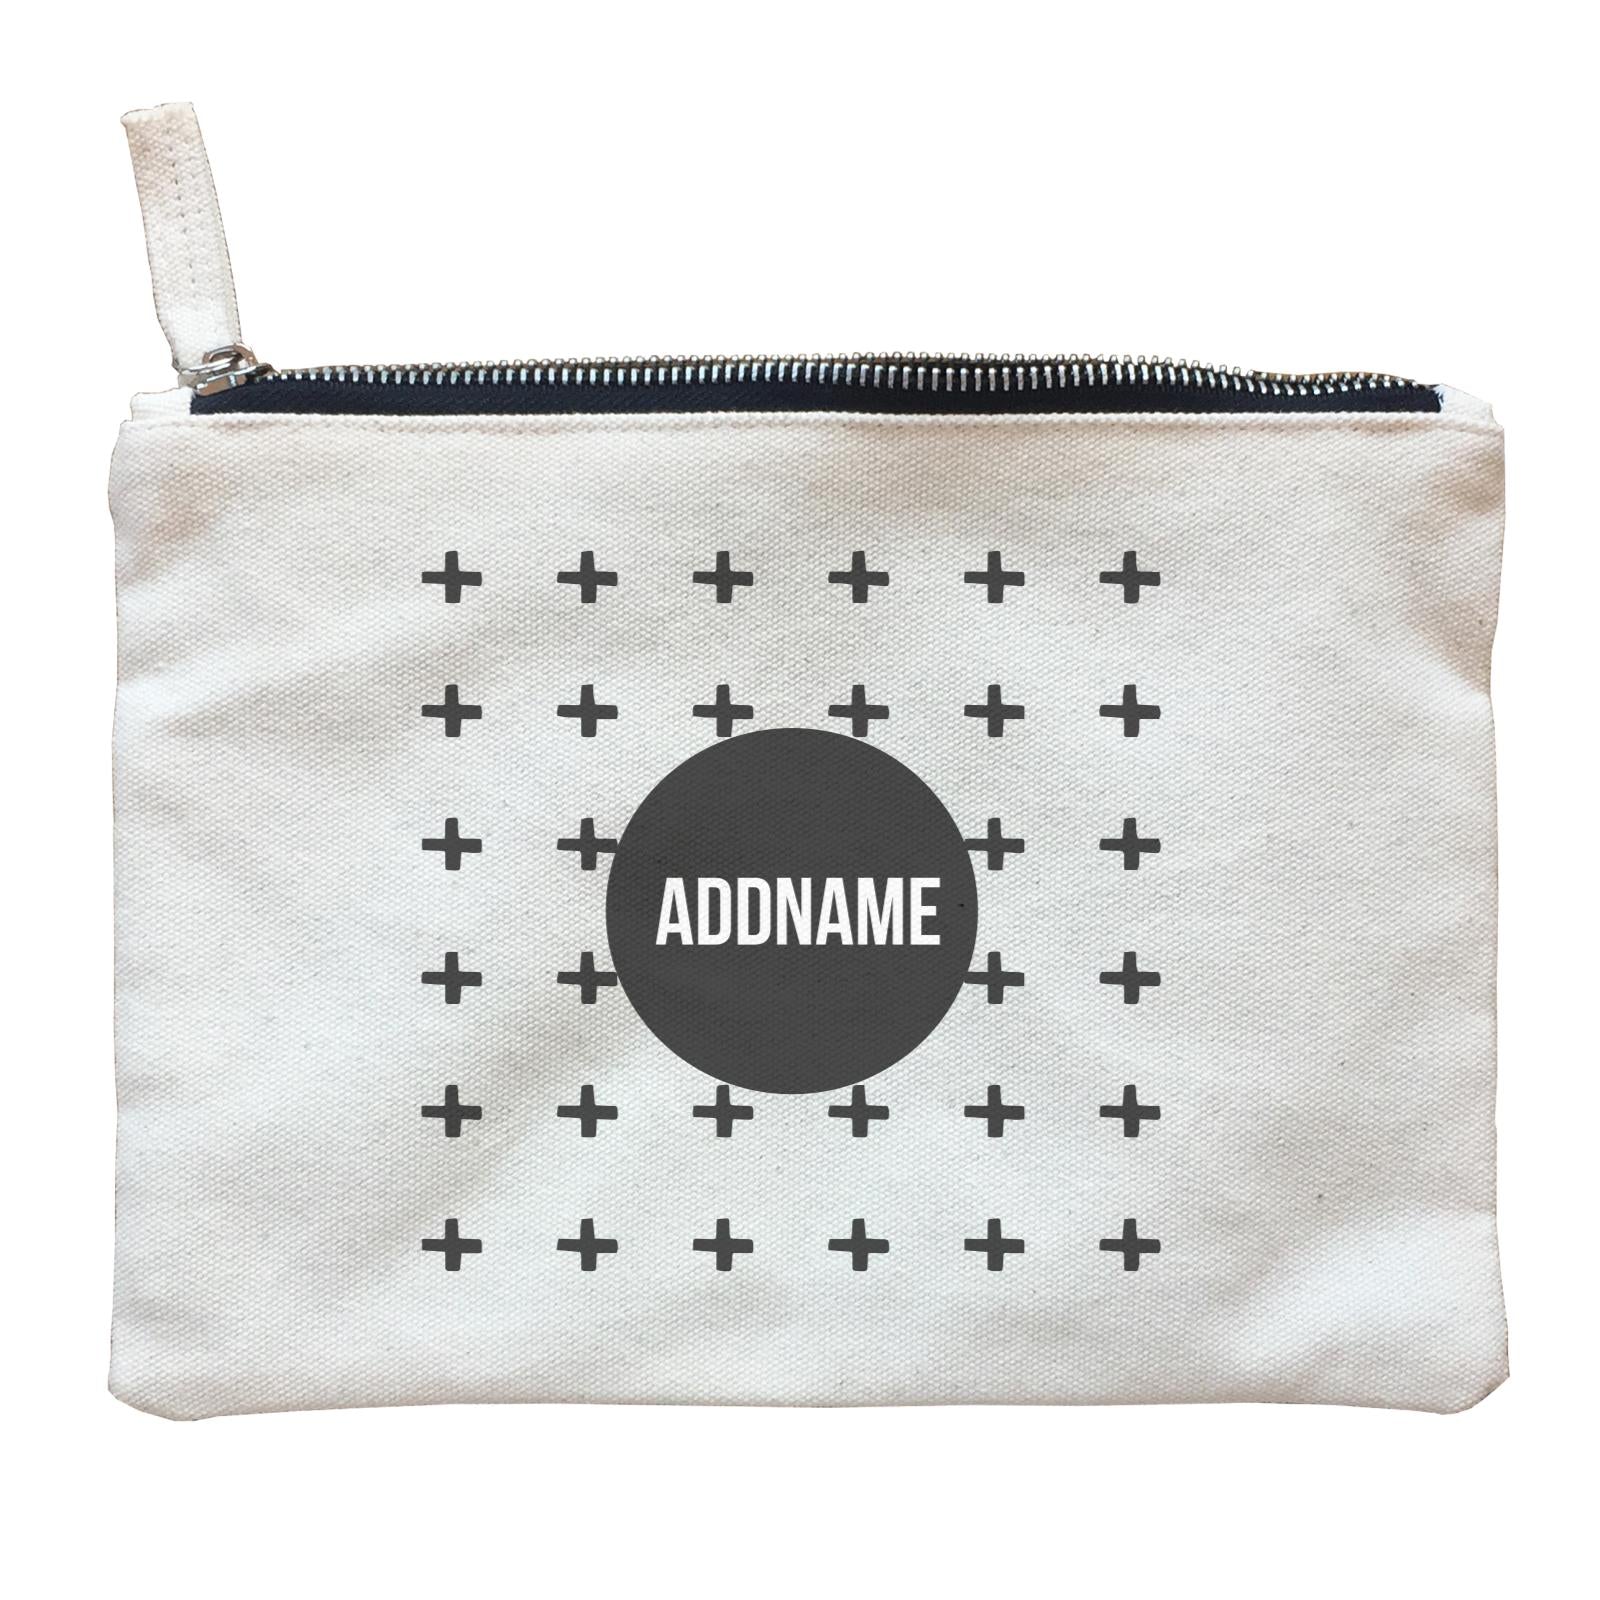 Monochrome Black Circle with Crosses Addname Zipper Pouch